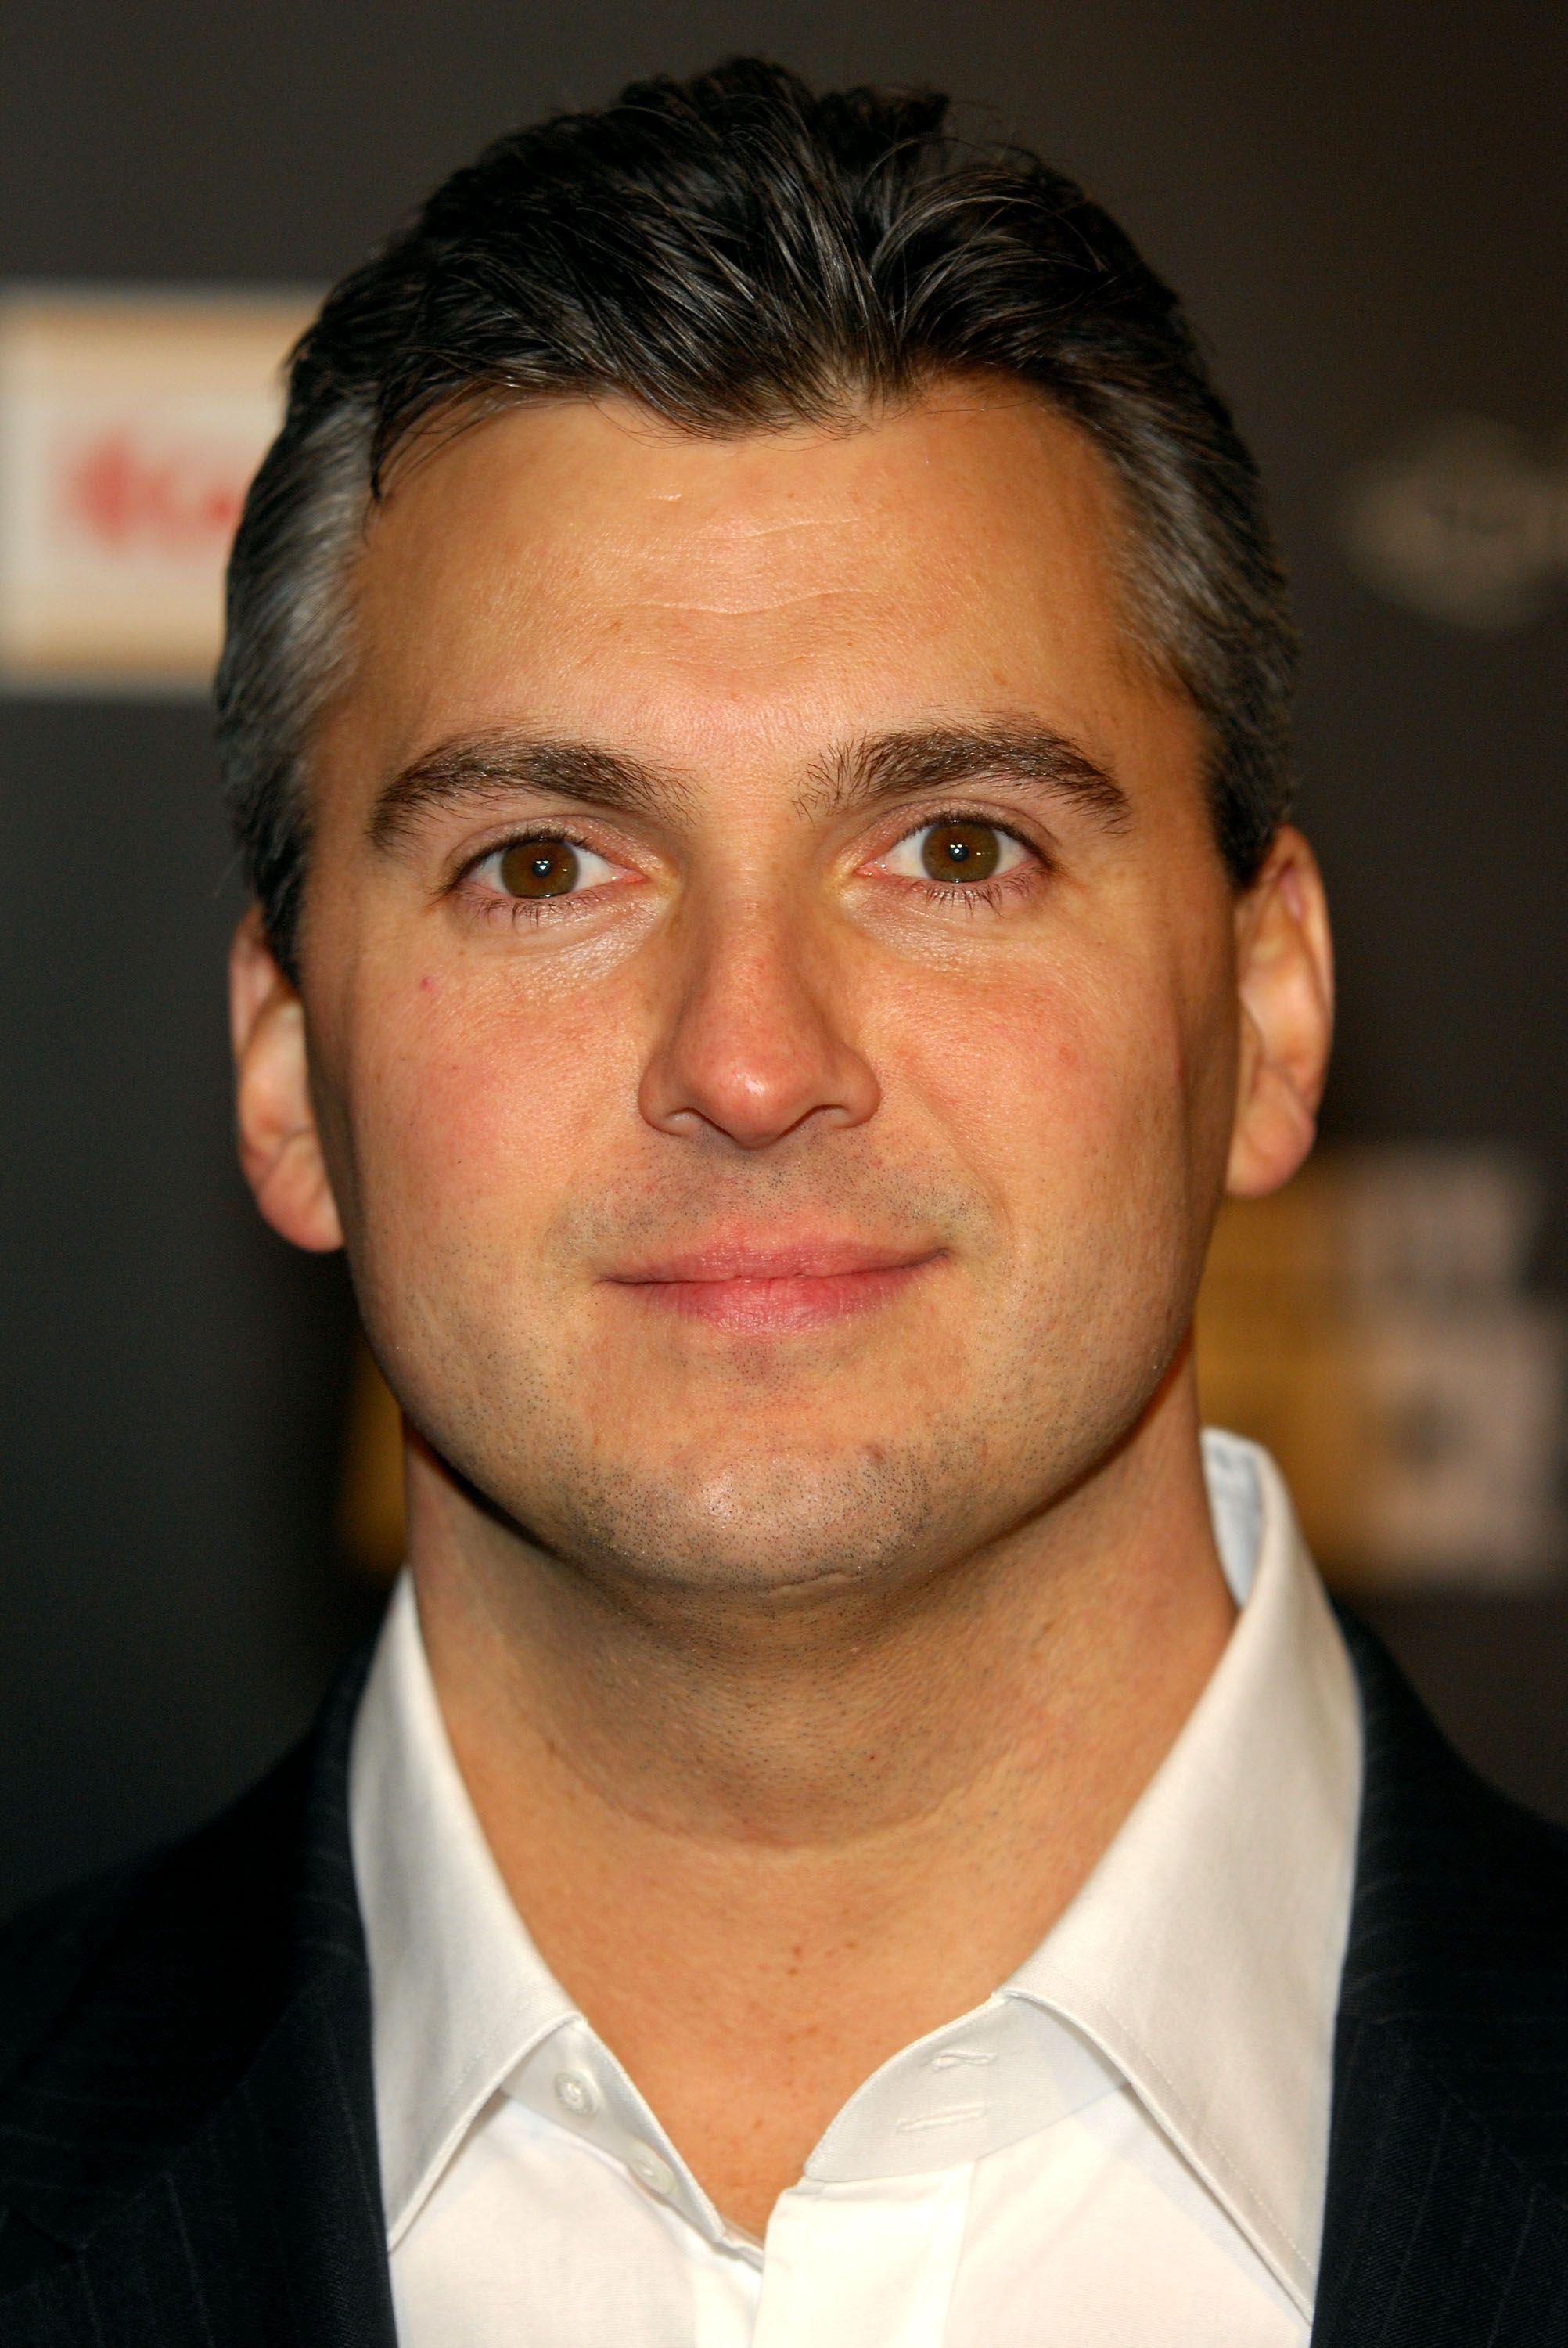 VIDEO: Off Air Footage Of Shane McMahon Thanking The Fans At WWE